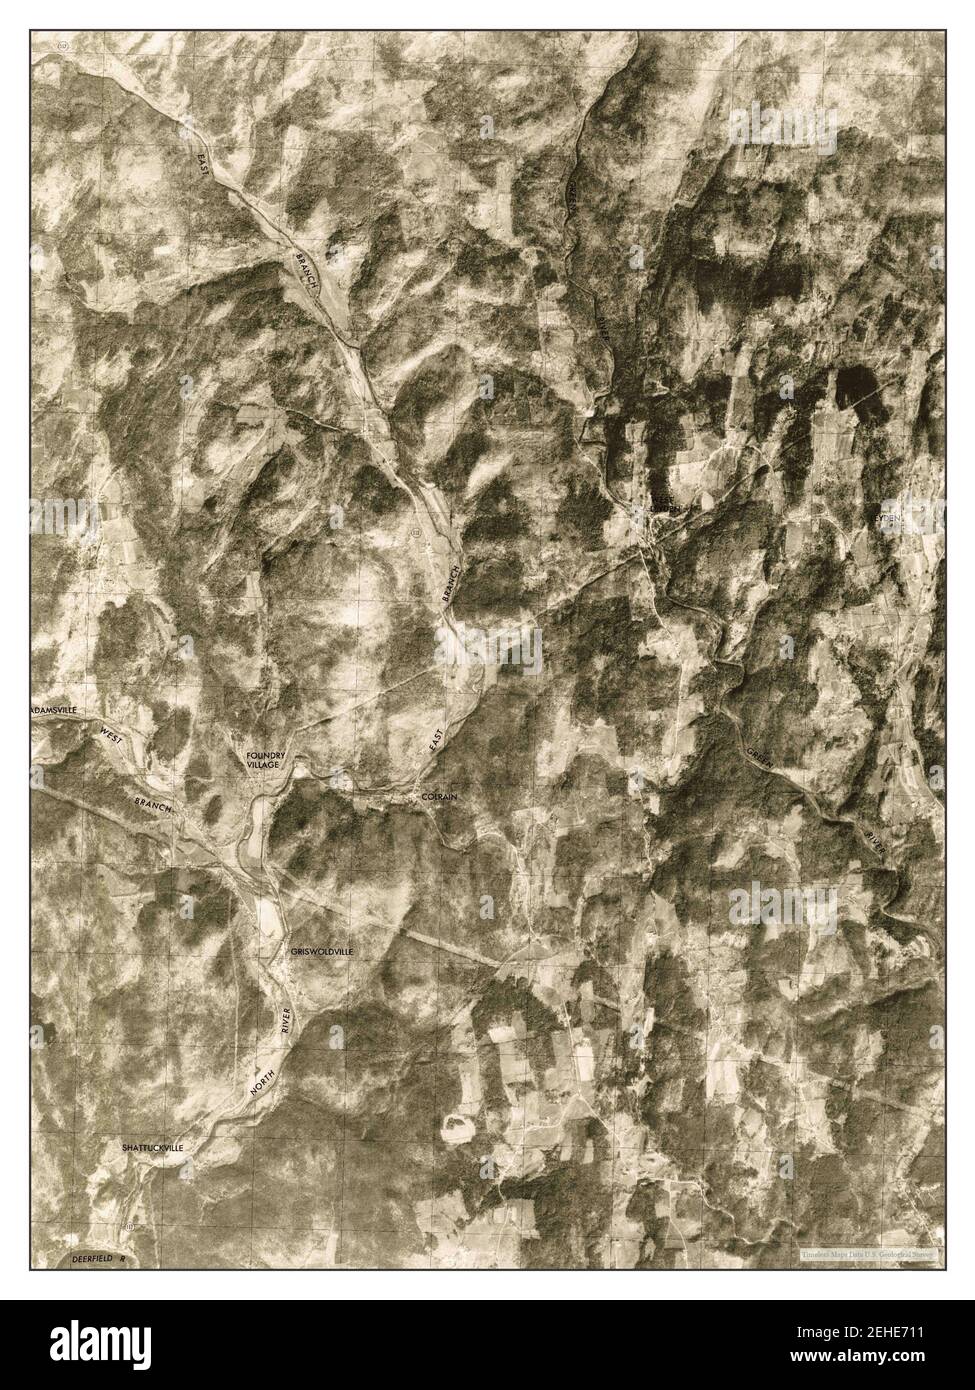 Colrain, Massachusetts, map 1975, 1:25000, United States of America by Timeless Maps, data U.S. Geological Survey Stock Photo